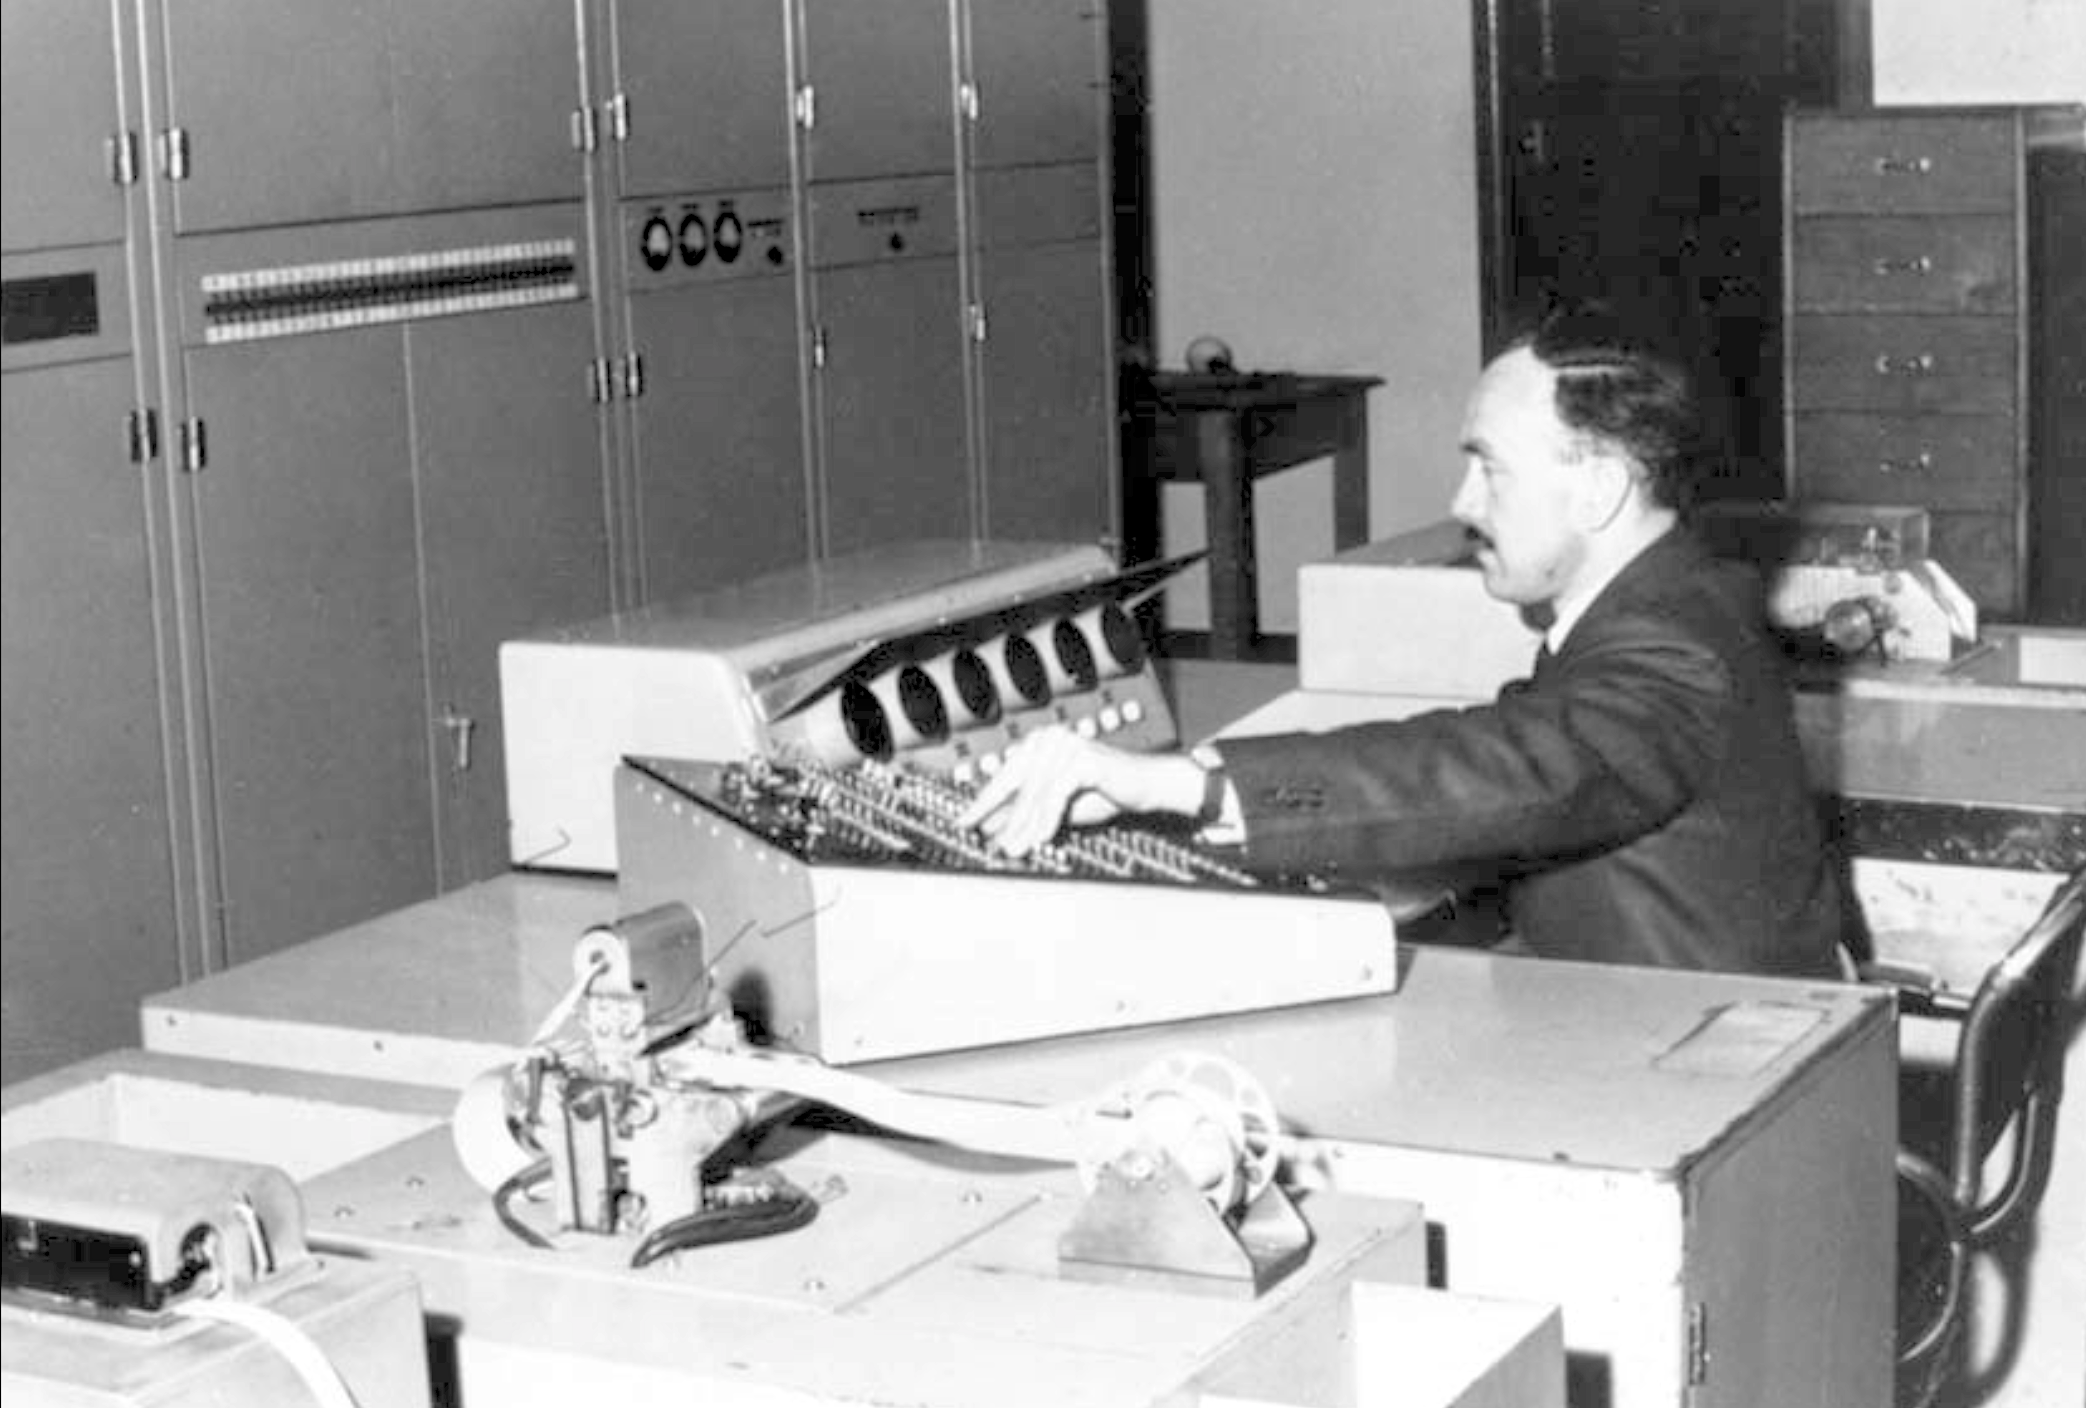 Computer engineer Jurij Semkiw at the CSIRAC console in early 1960s [Museums Victoria]